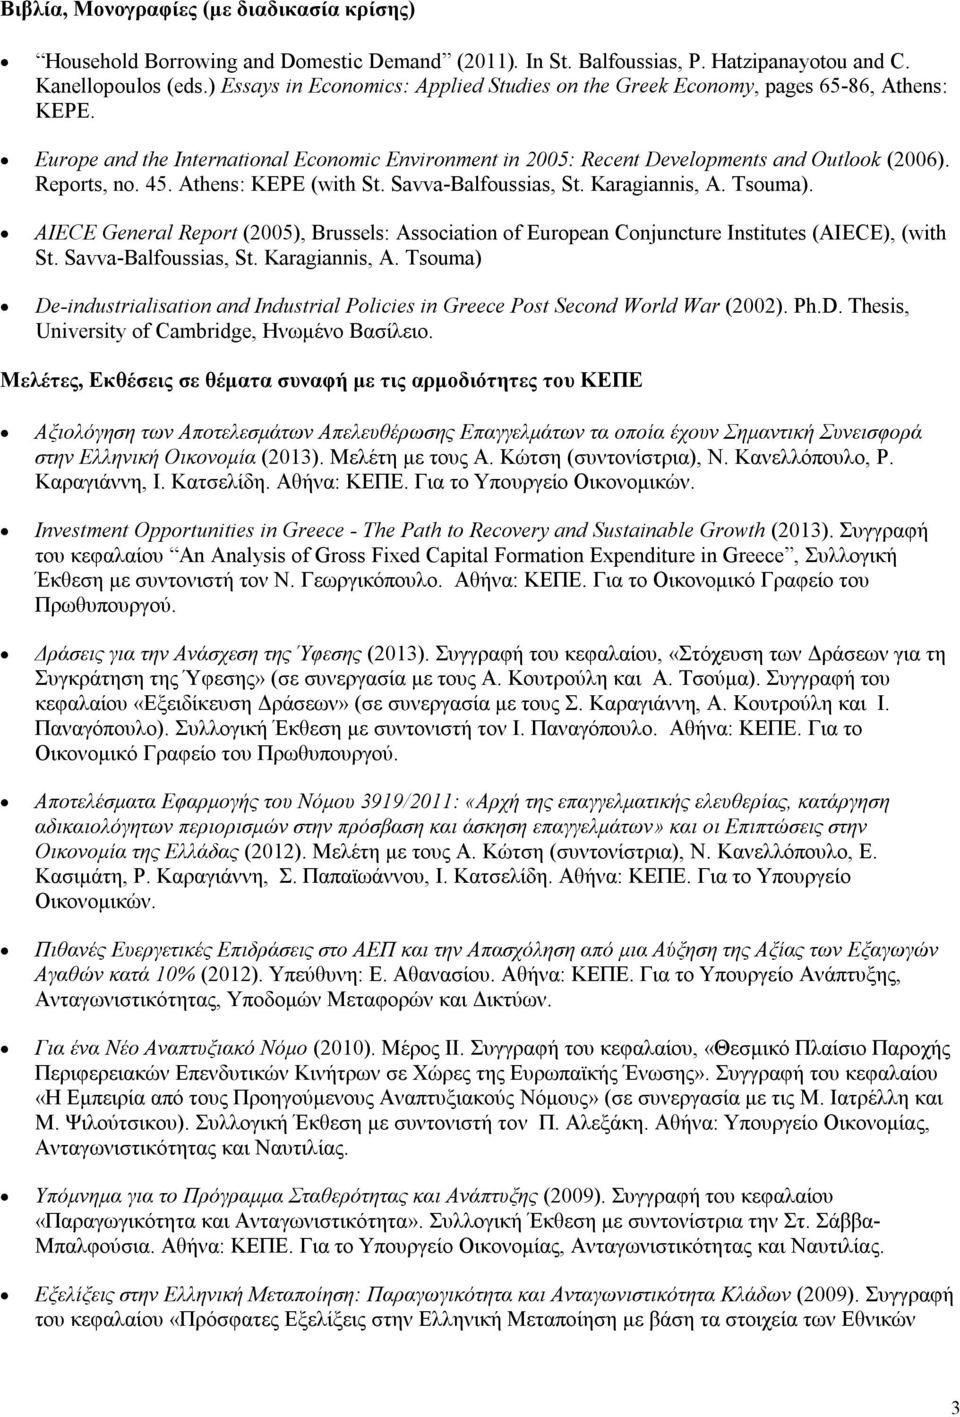 45. Athens: KEPE (with St. Savva-Balfoussias, St. Karagiannis, A. Tsouma). ΑIECE General Report (2005), Brussels: Association of European Conjuncture Institutes (AIECE), (with St.